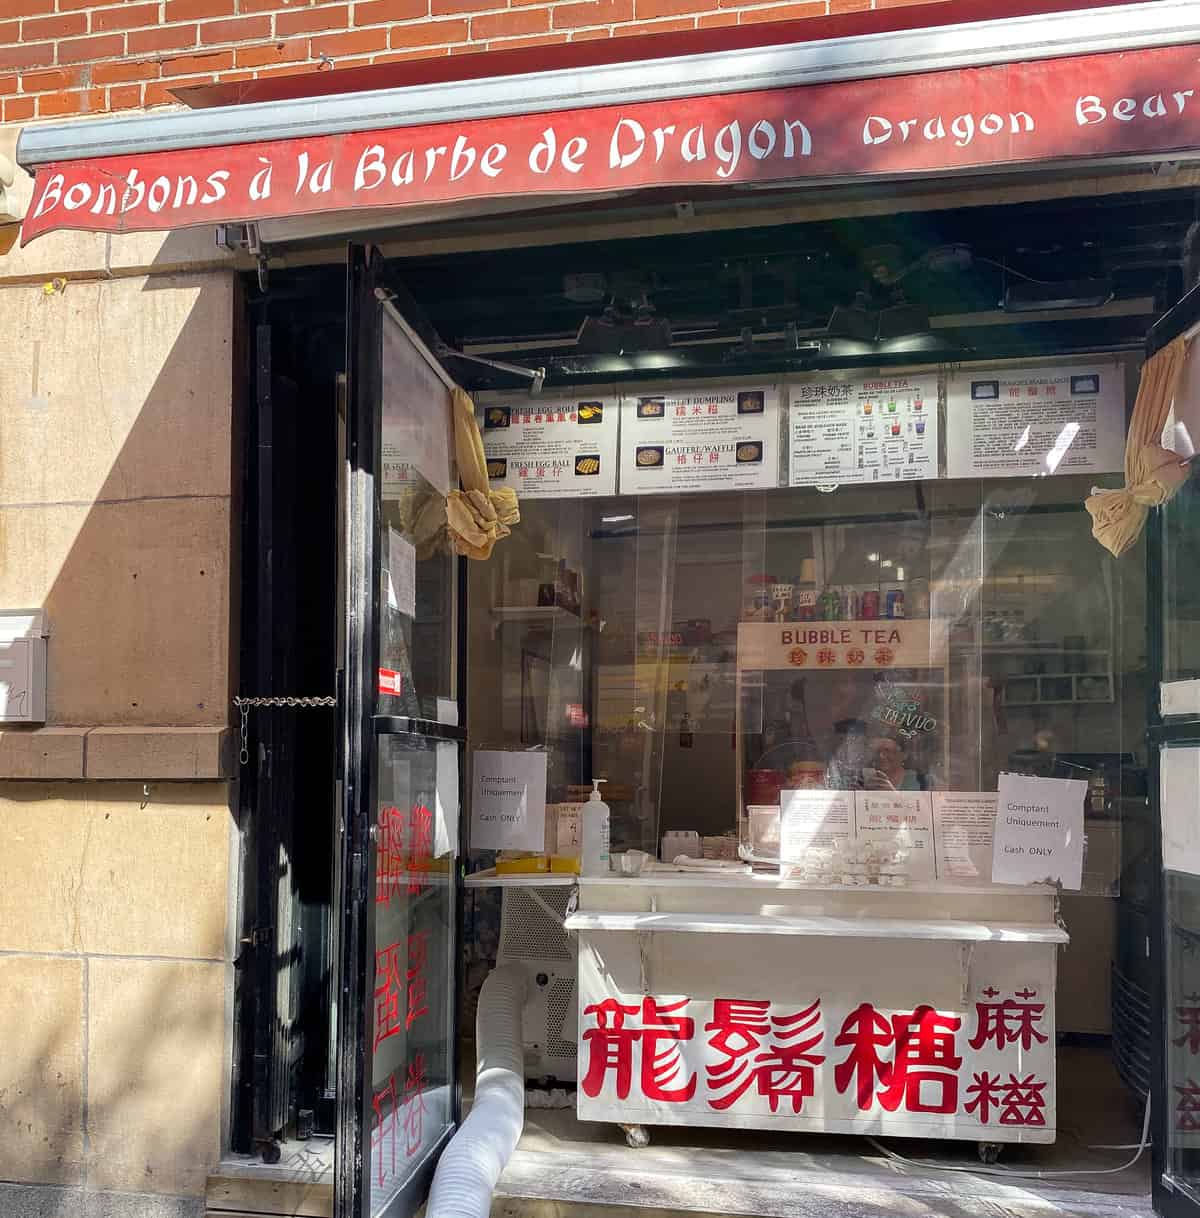 Shop entrance with red awning and Chinese characters on counter.